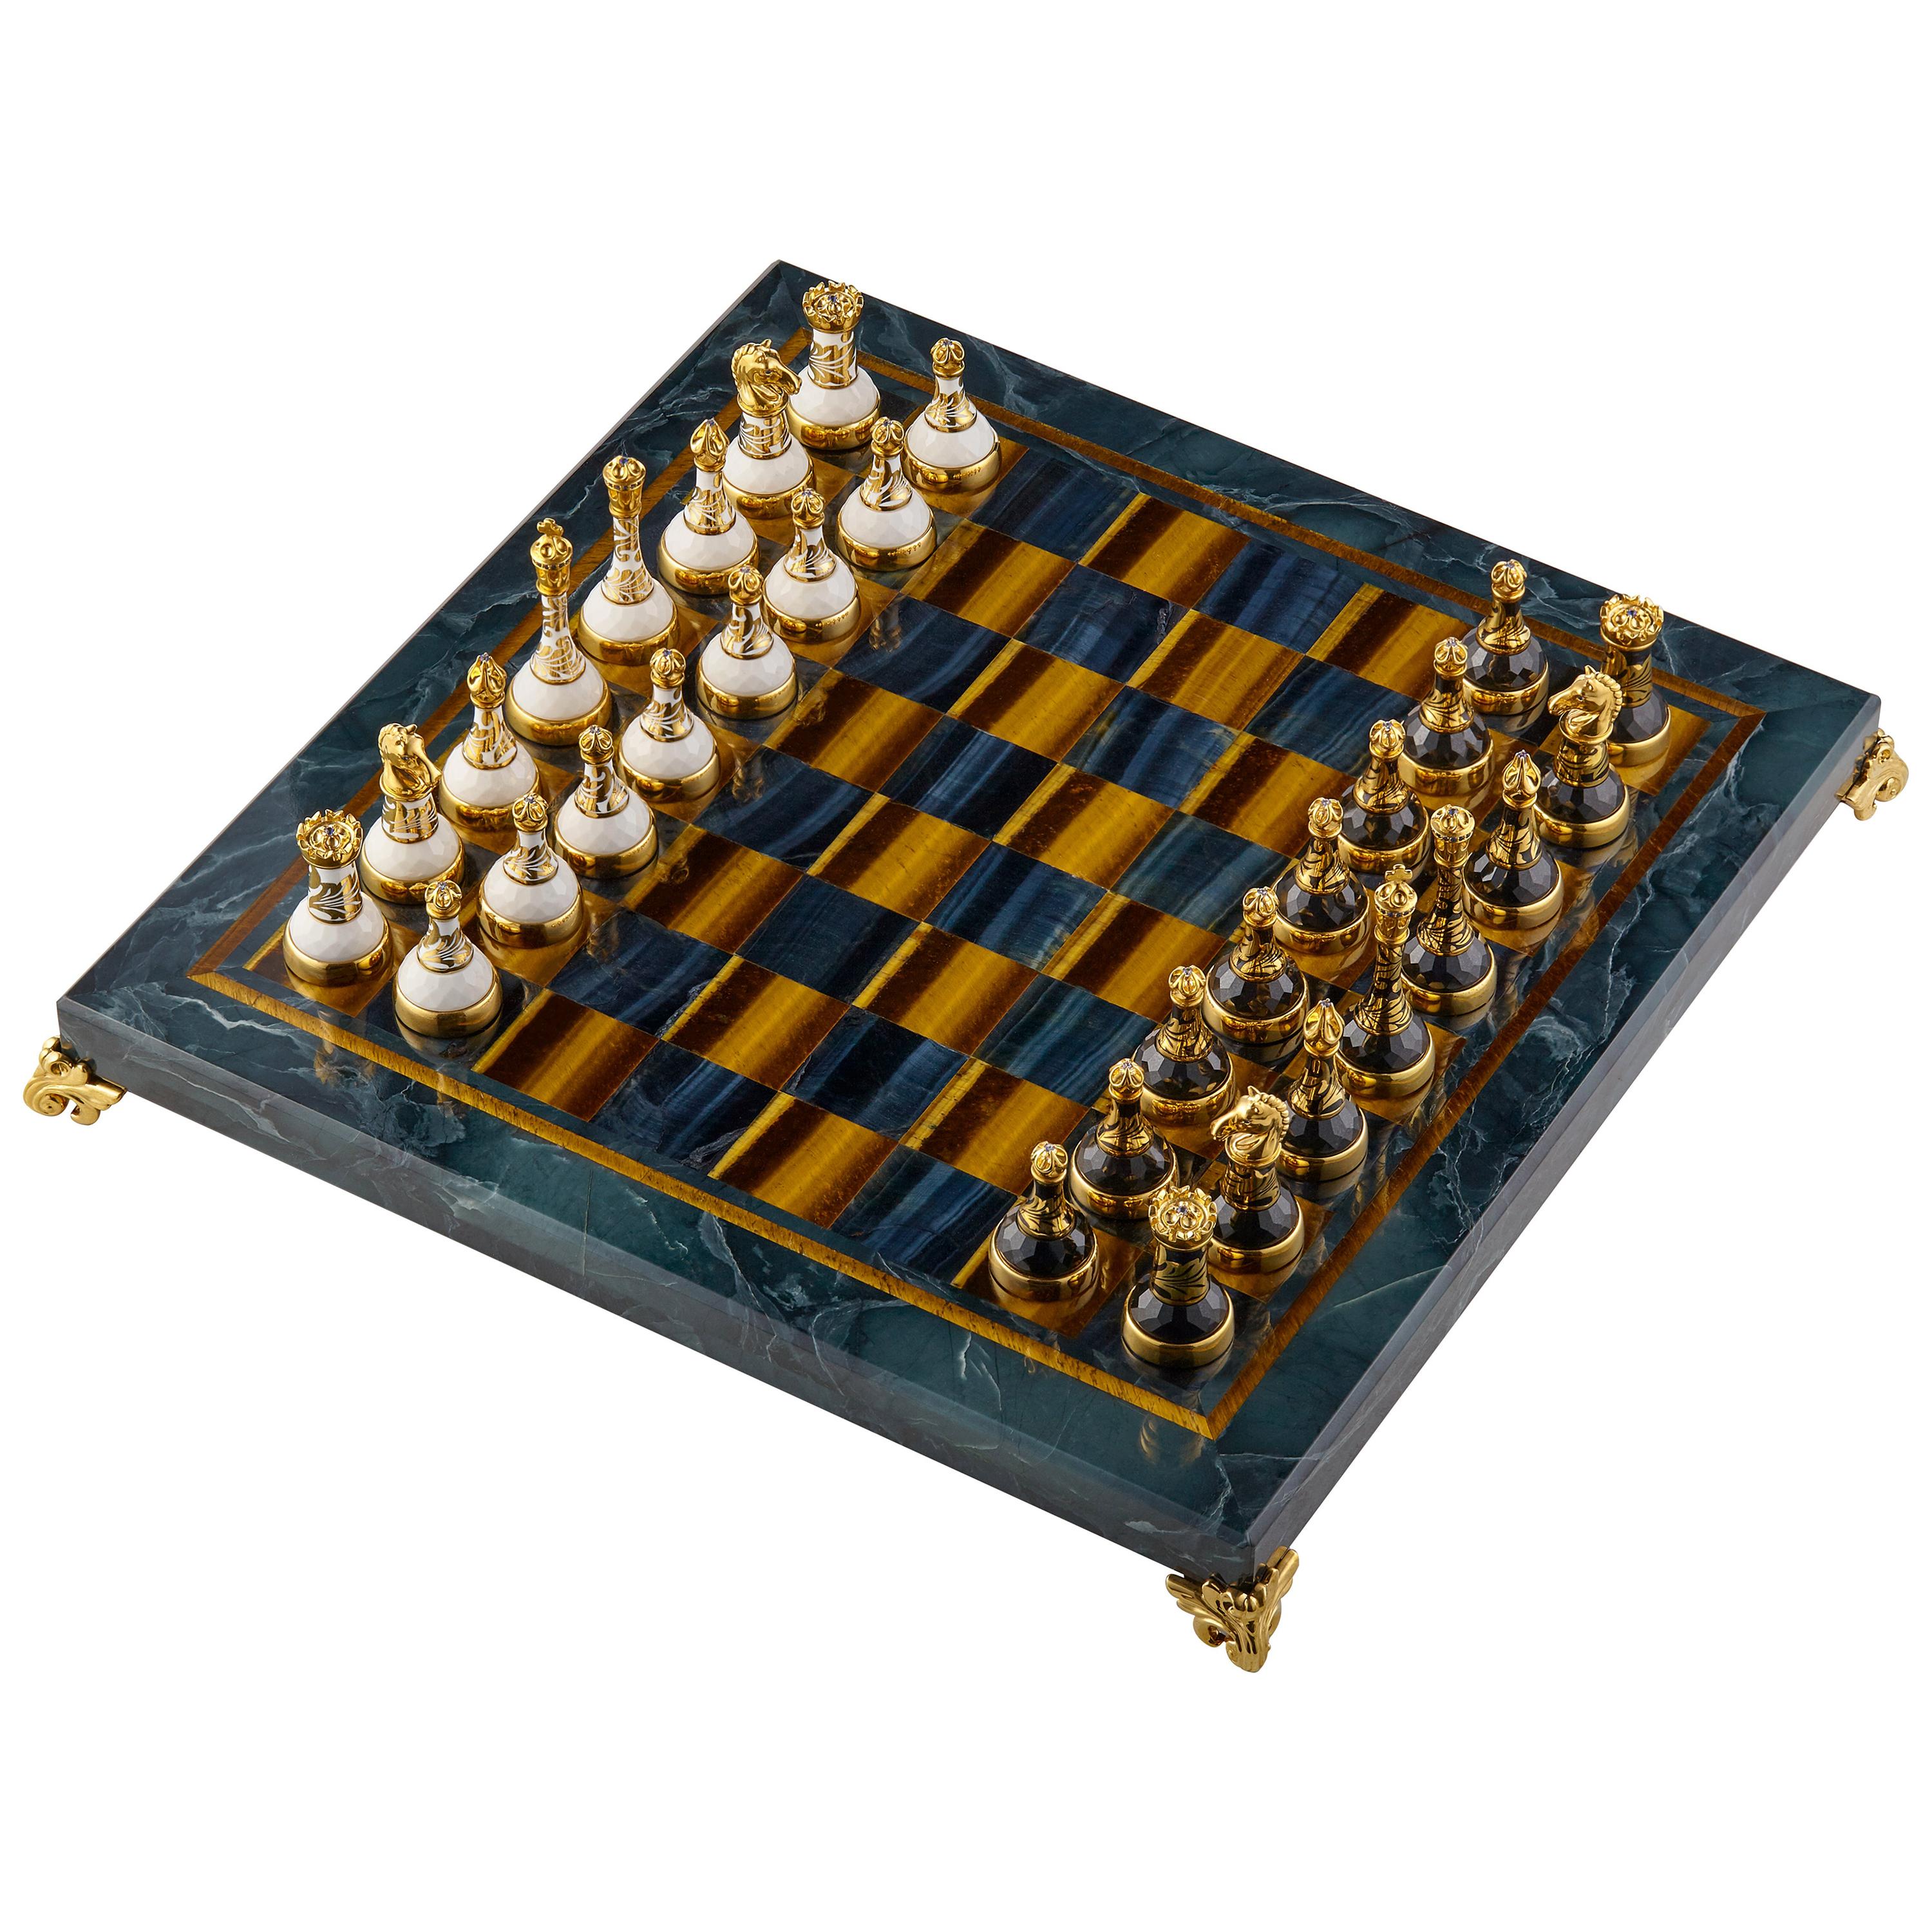 SV925 Gold Jewel Chess with Sapphire